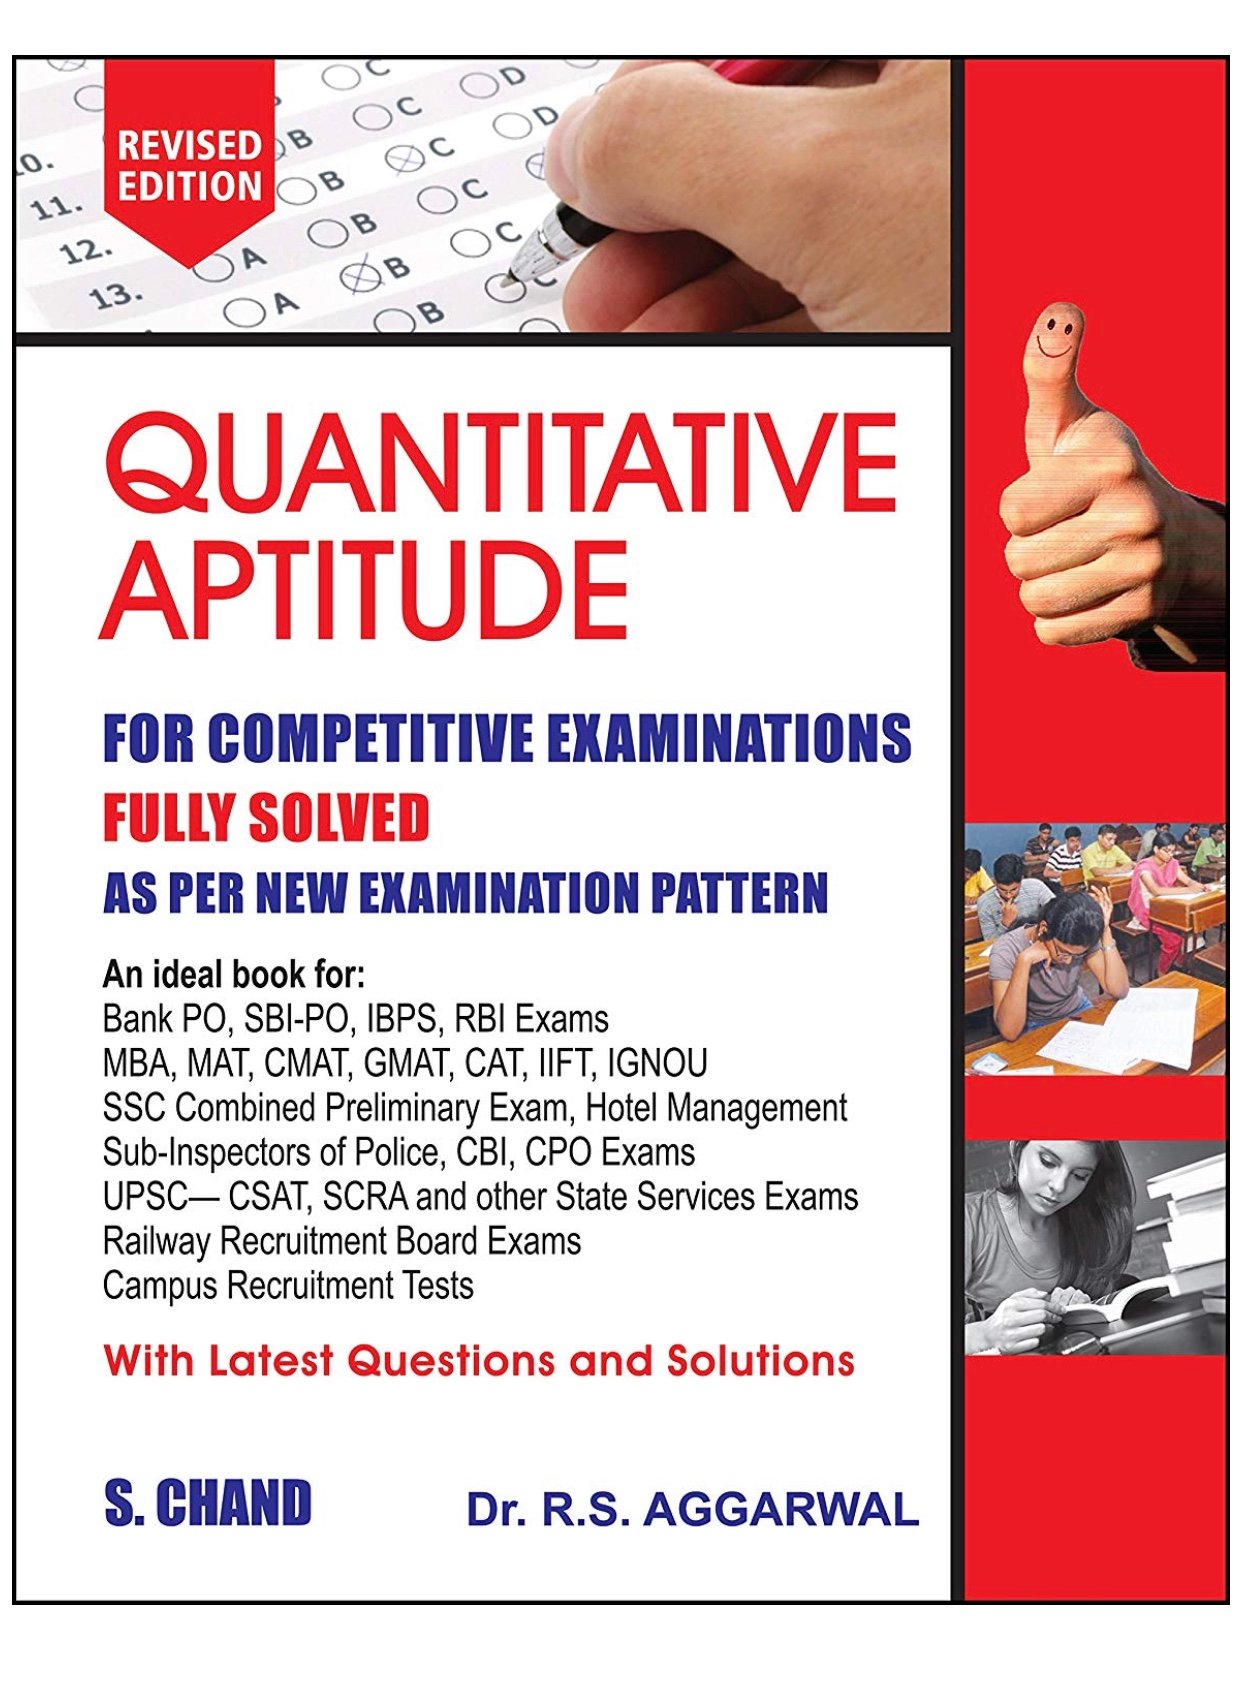 quantitative-aptitude-by-rs-agarwal-wishallbook-online-bookstore-lucknow